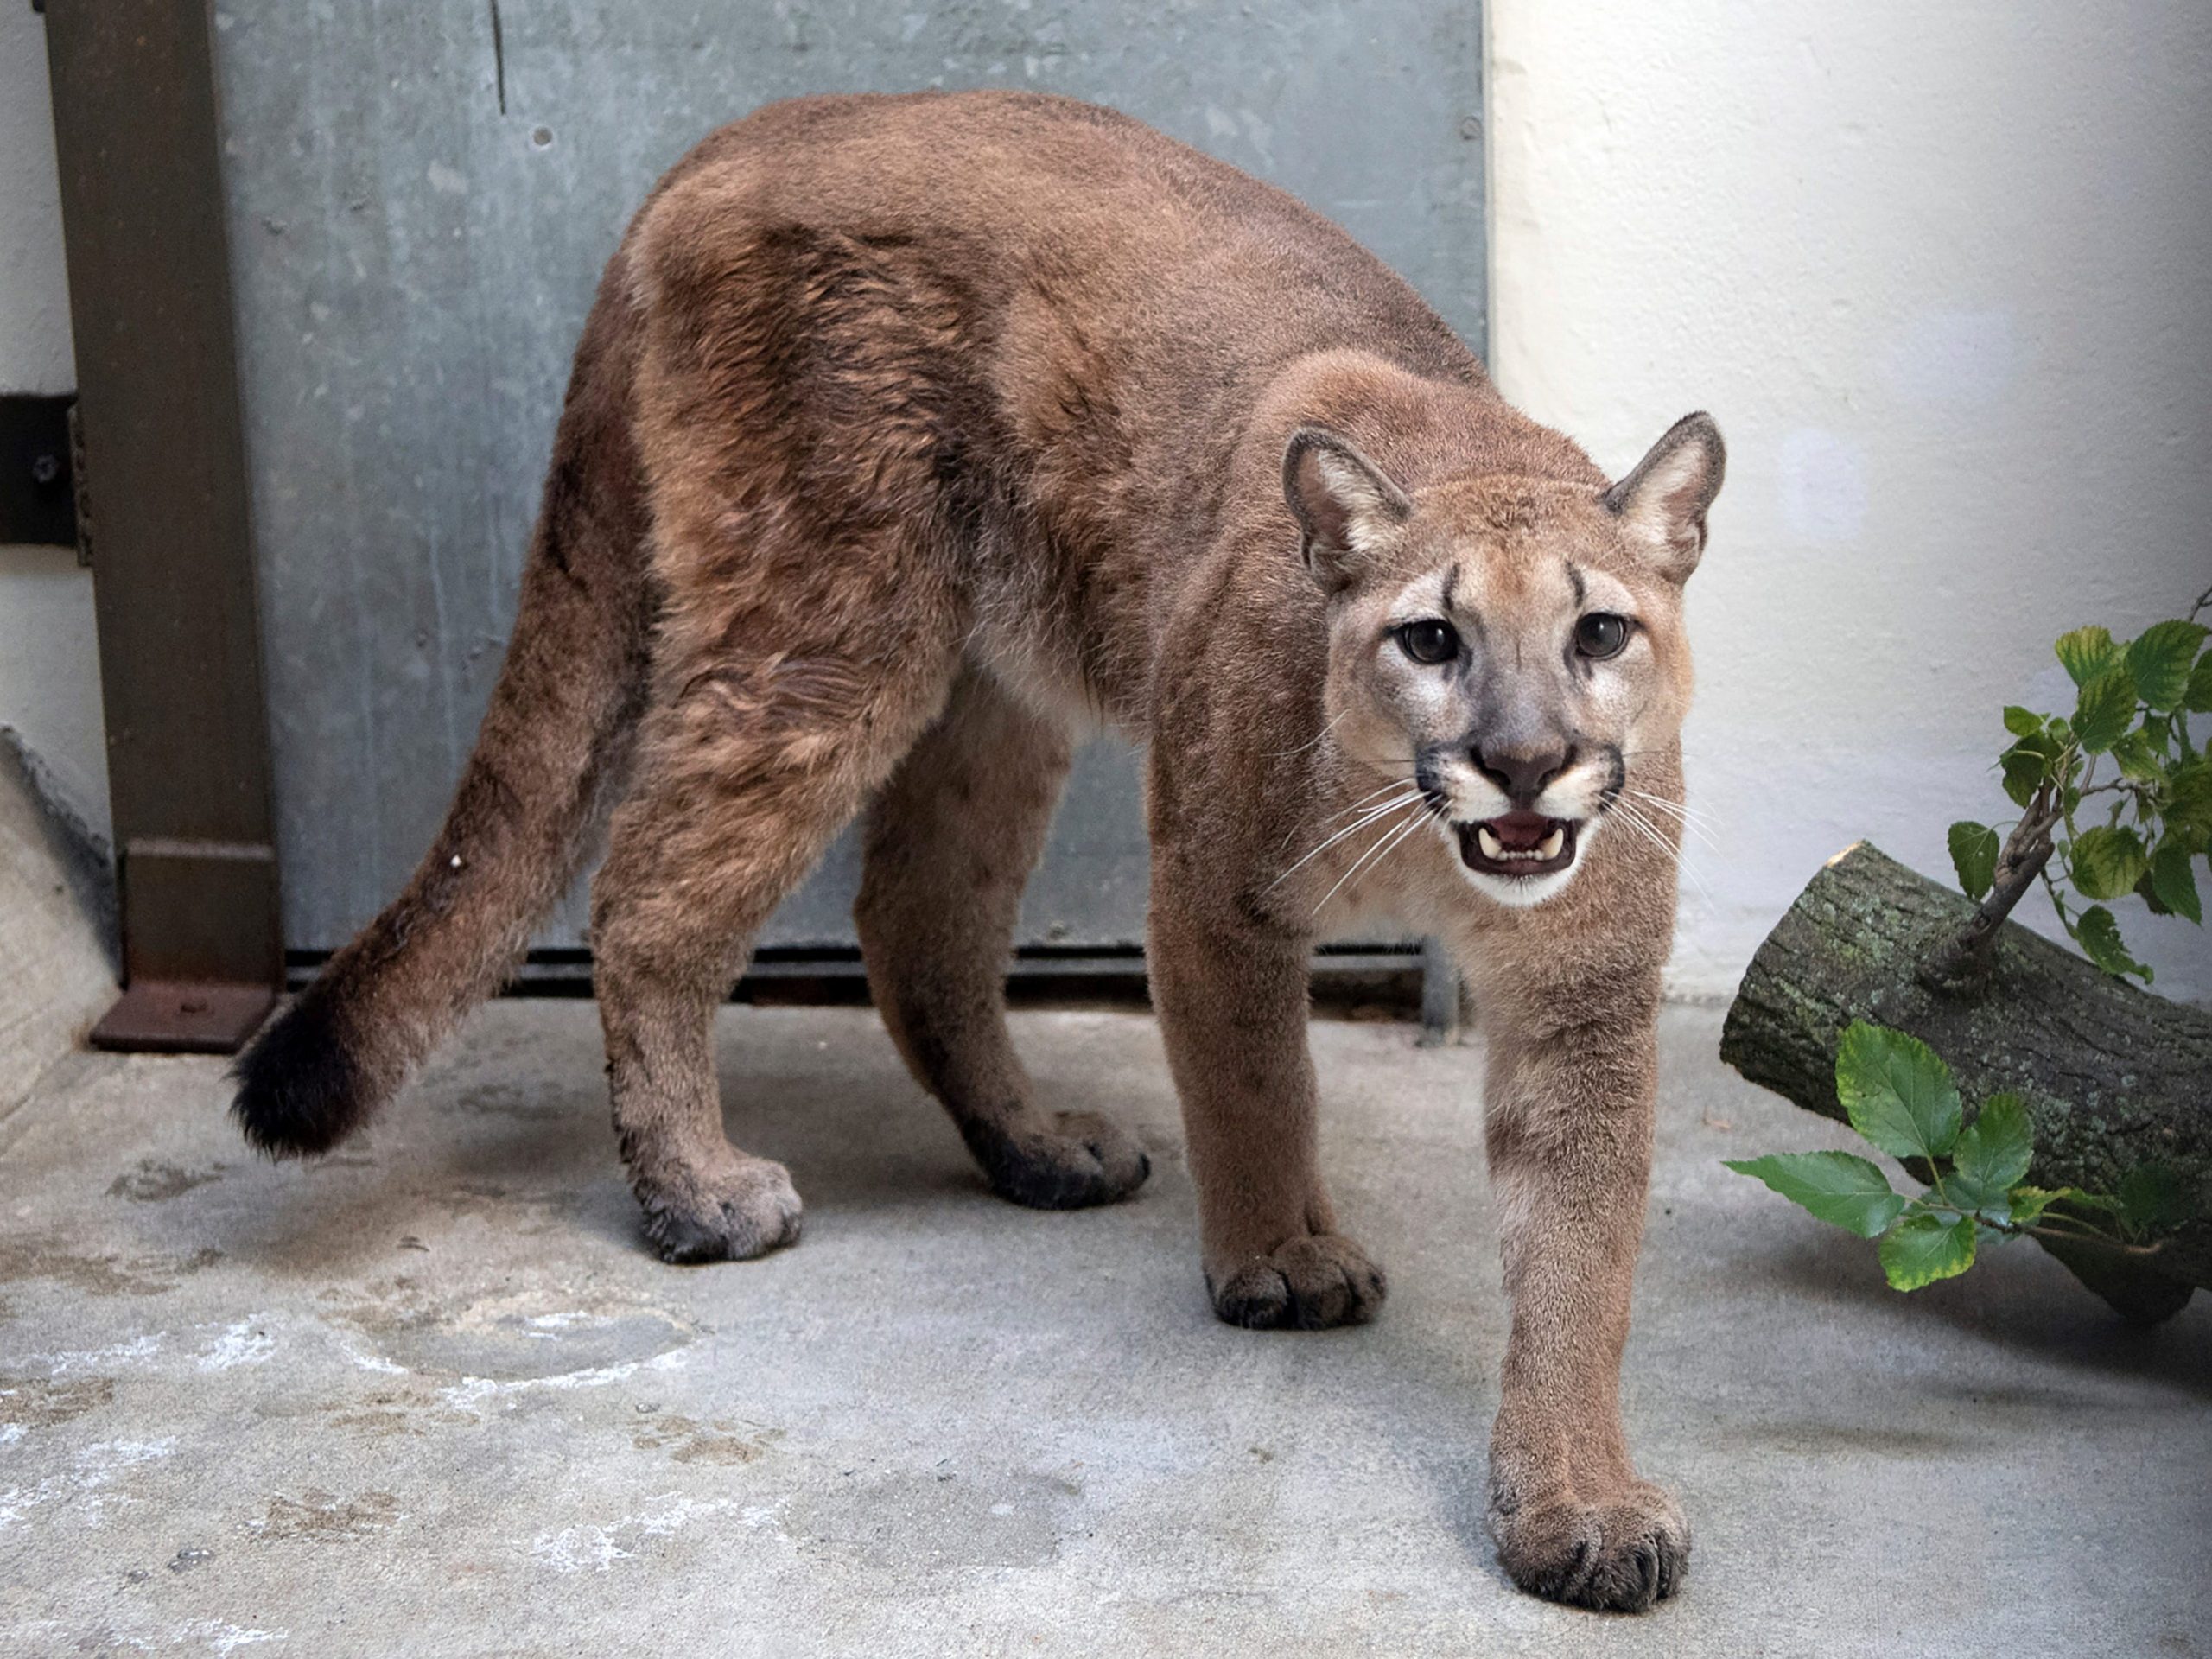 This photo provided by New York's Bronx Zoo shows an 11-month-old, 80-pound cougar that was removed from an apartment, in the Bronx borough of New York, where she was being kept illegally as a pet, animal welfare officials said Monday, August 30, 2021.